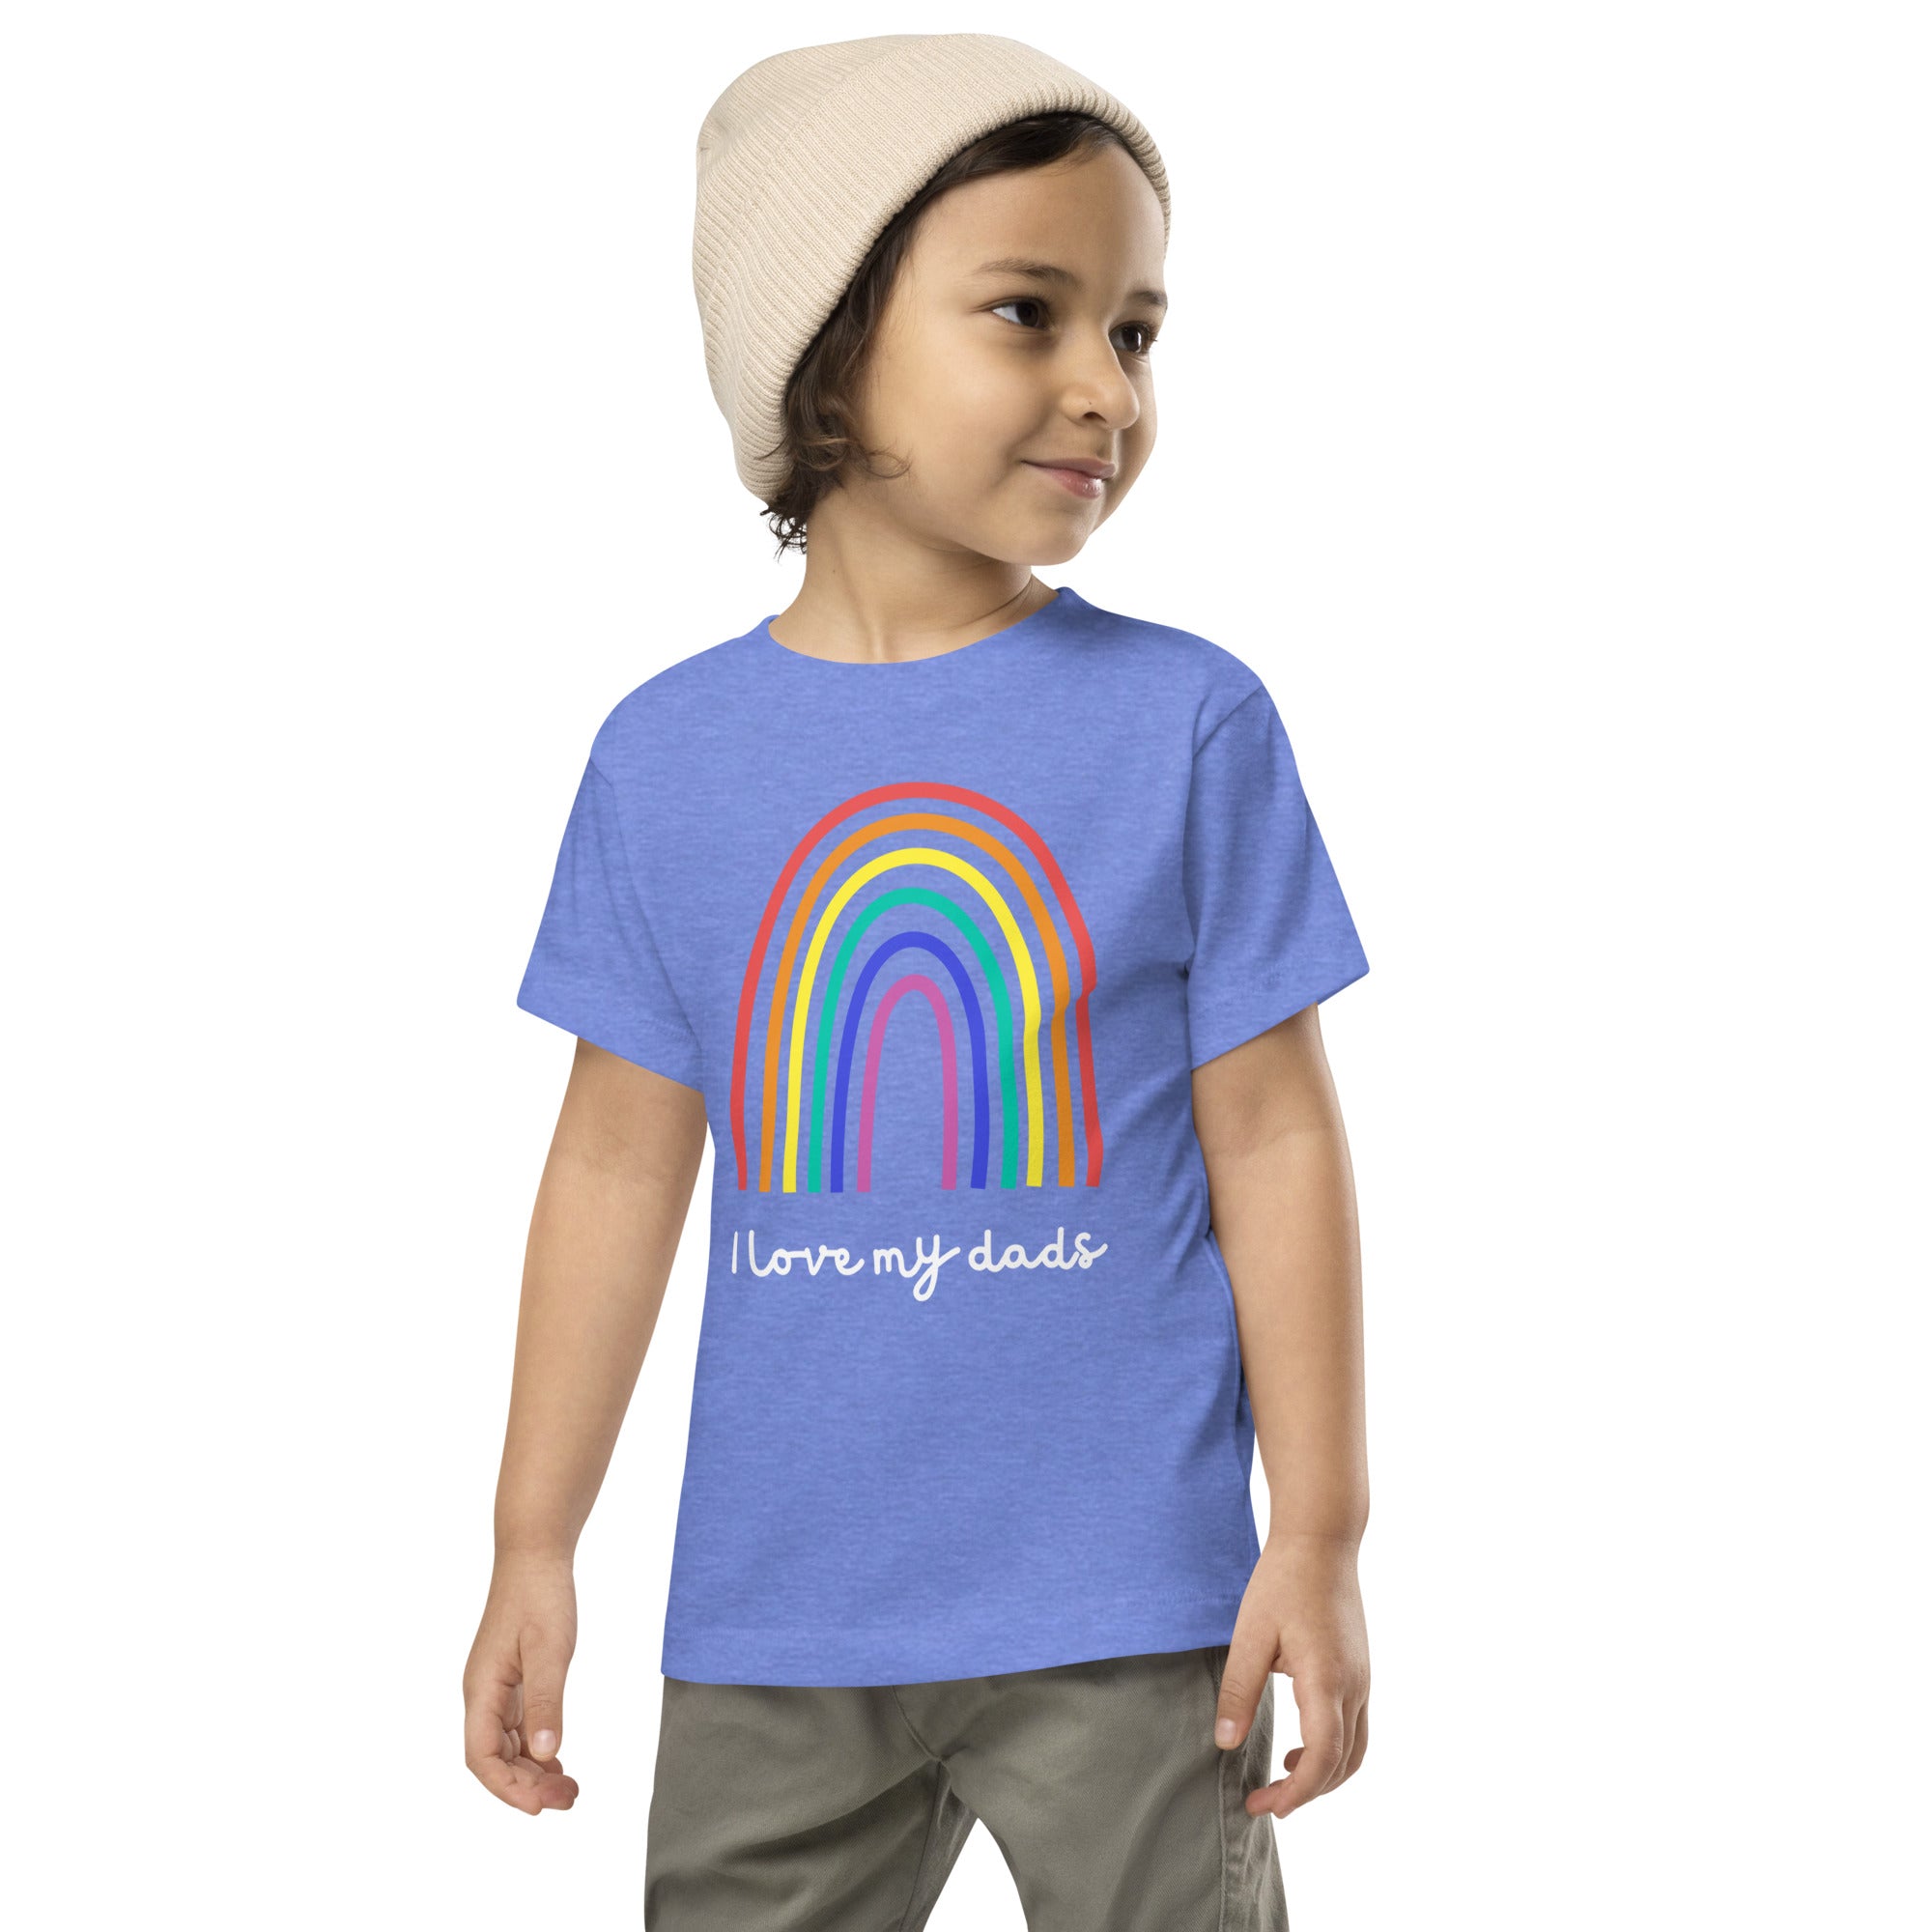 I Love My Dads - Toddler Short Sleeve Tee